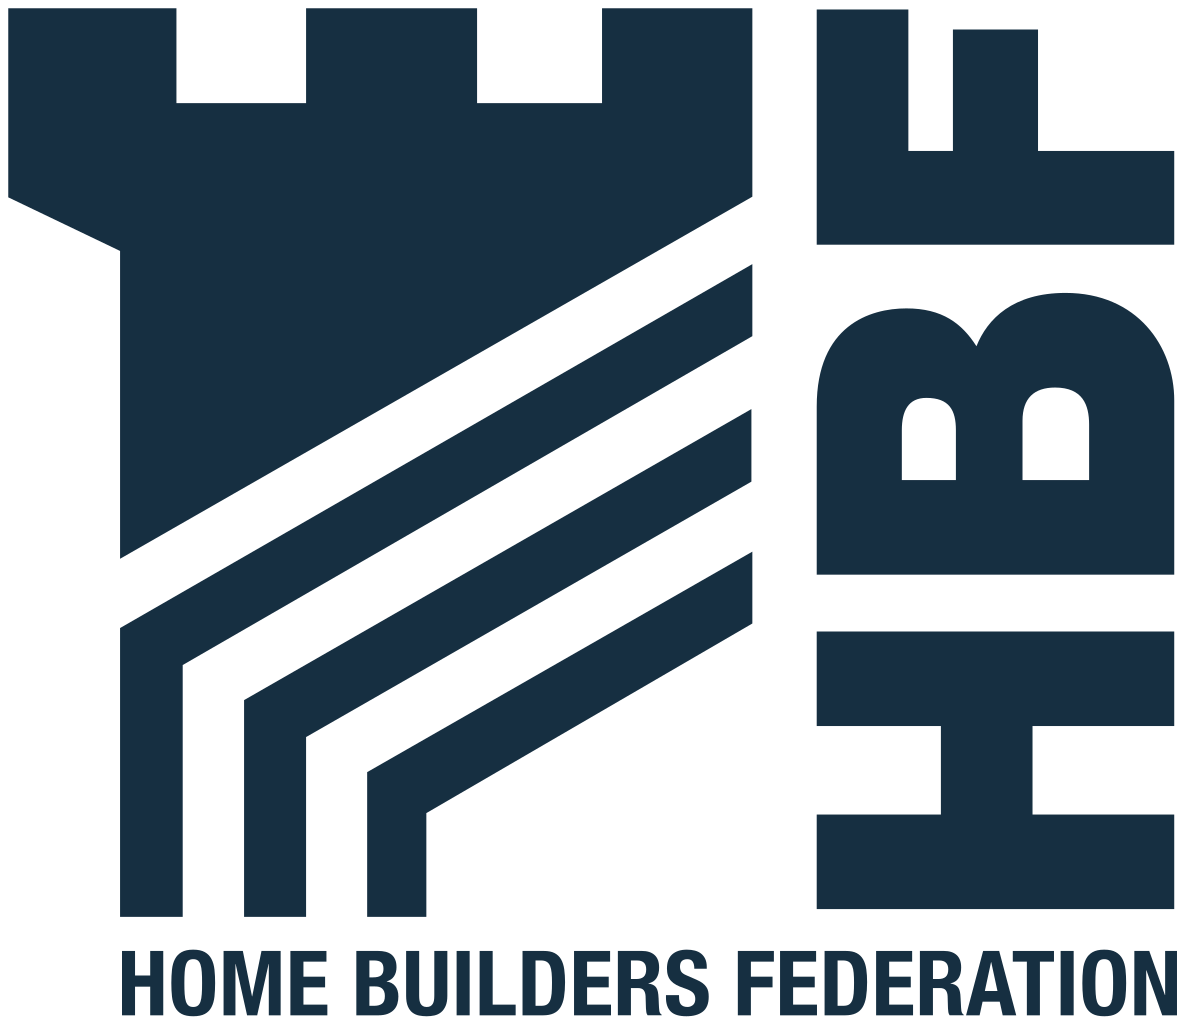 Extract contact information for home builders registered to the Home builders Federation UK